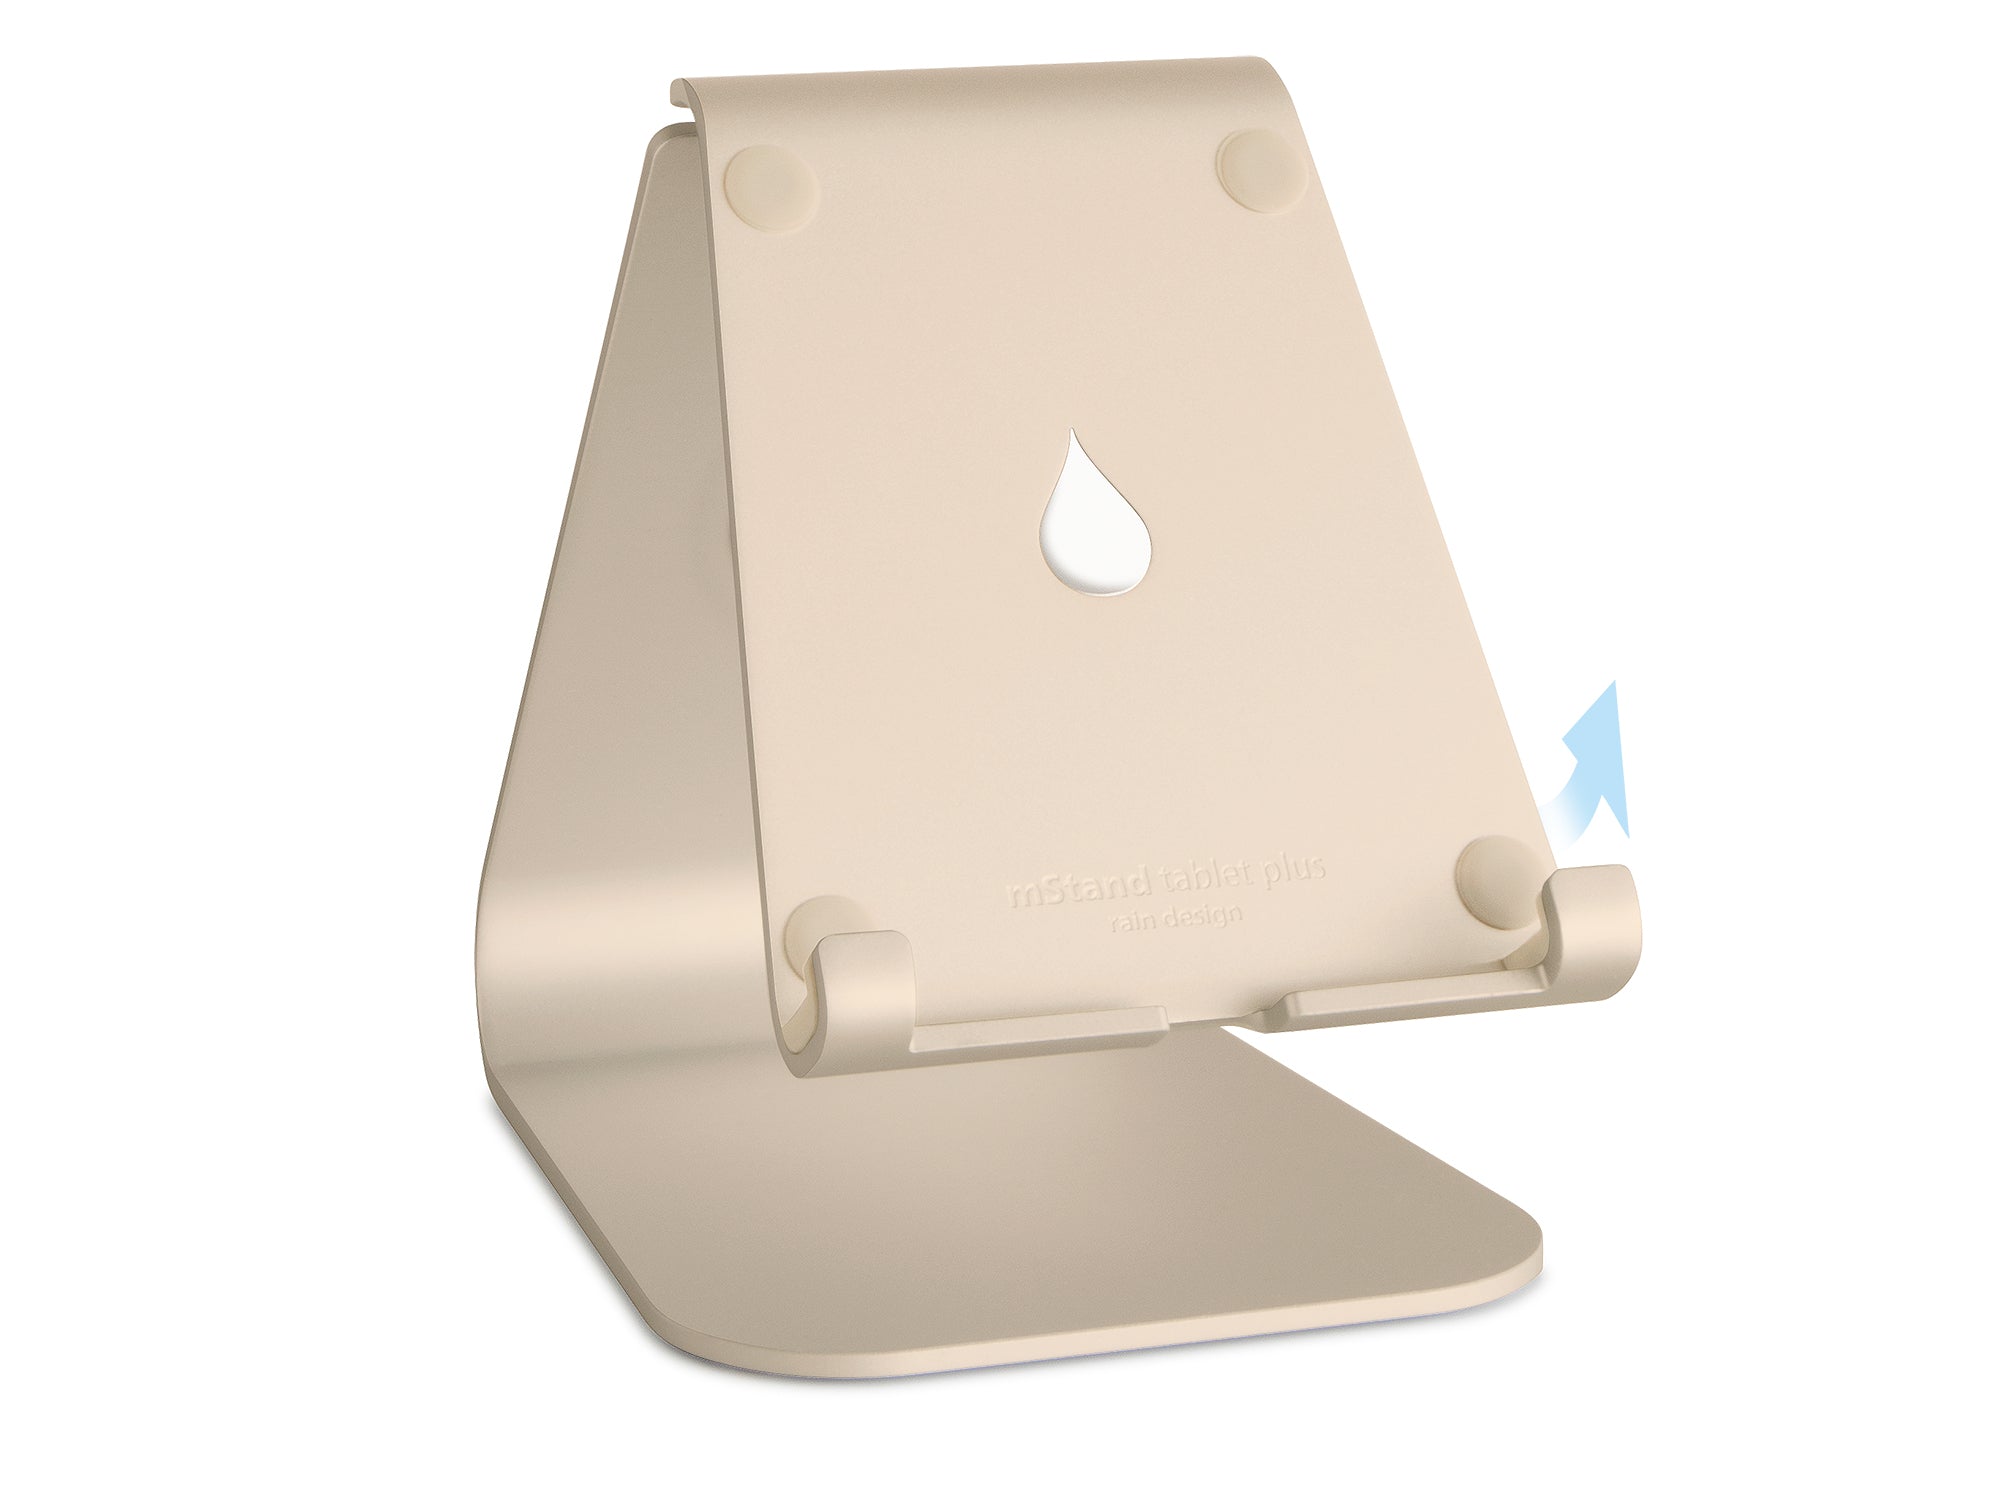 Rain Design mStand Tablet Plus for iPad Gold